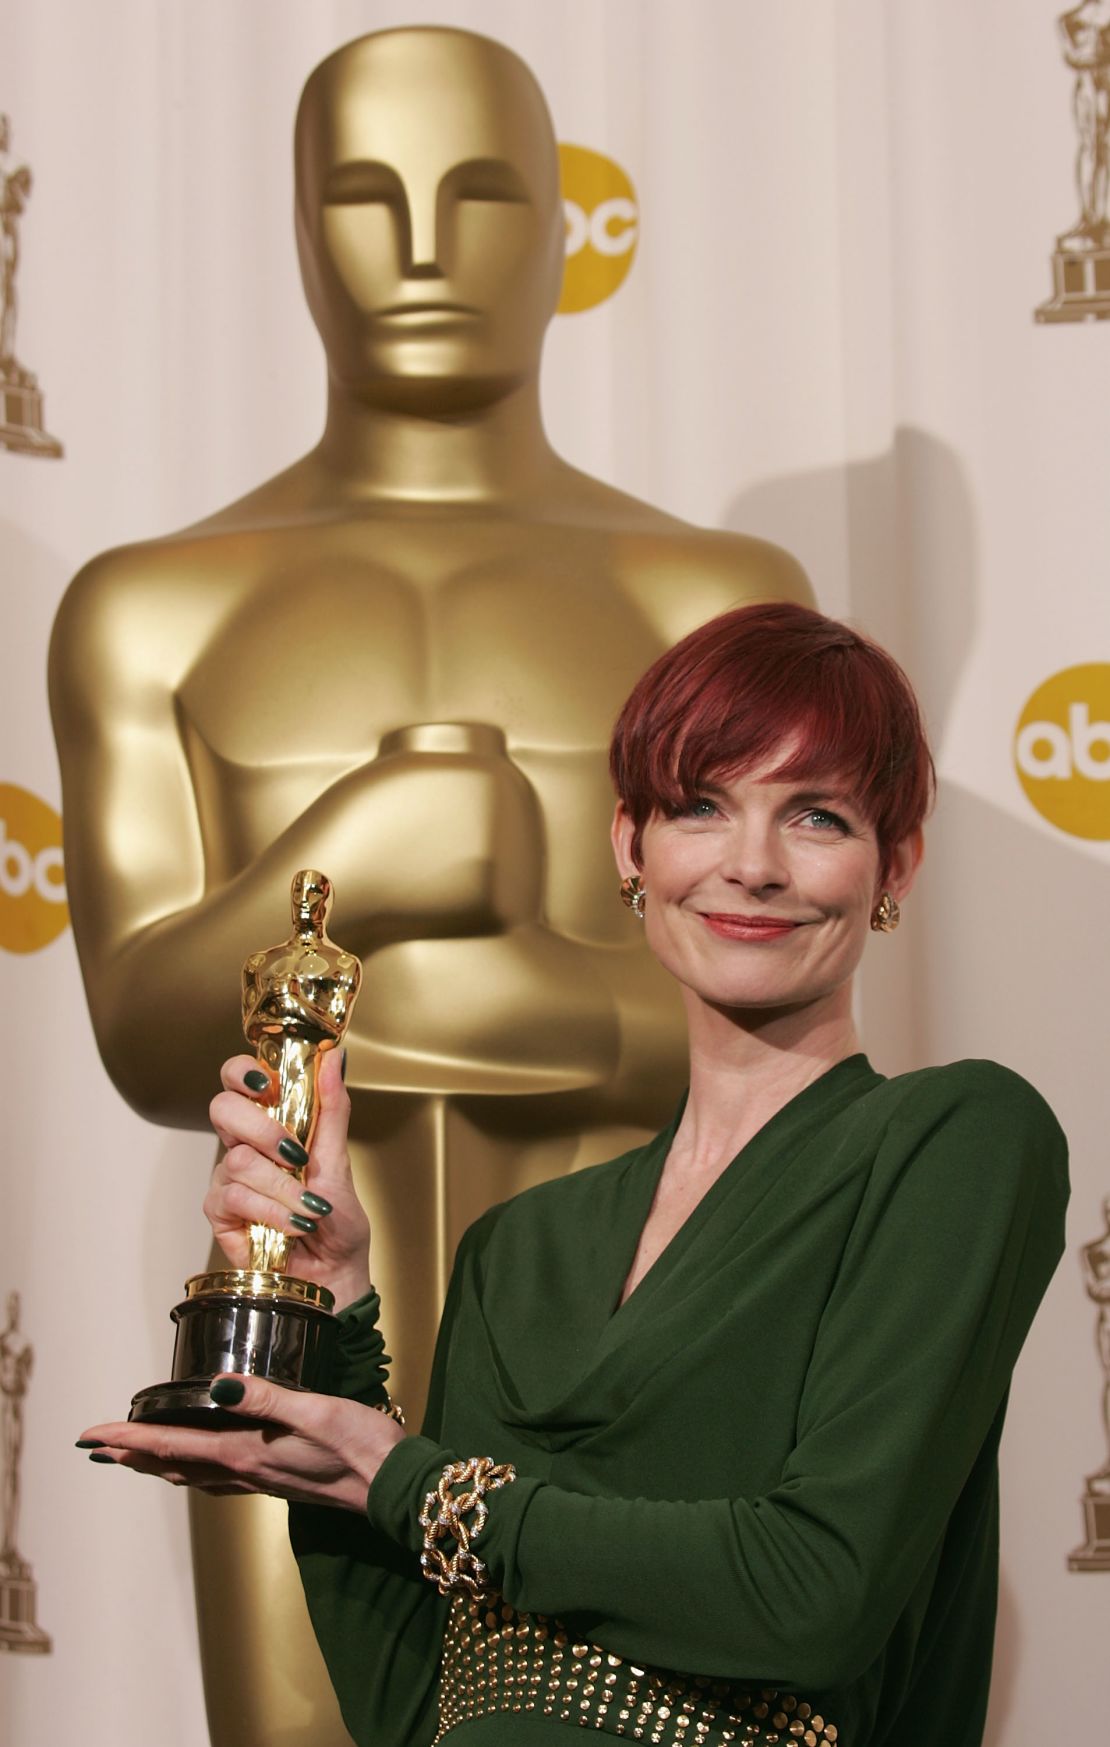 Powell with her second Academy Award, won for "The Aviator" in 2005.